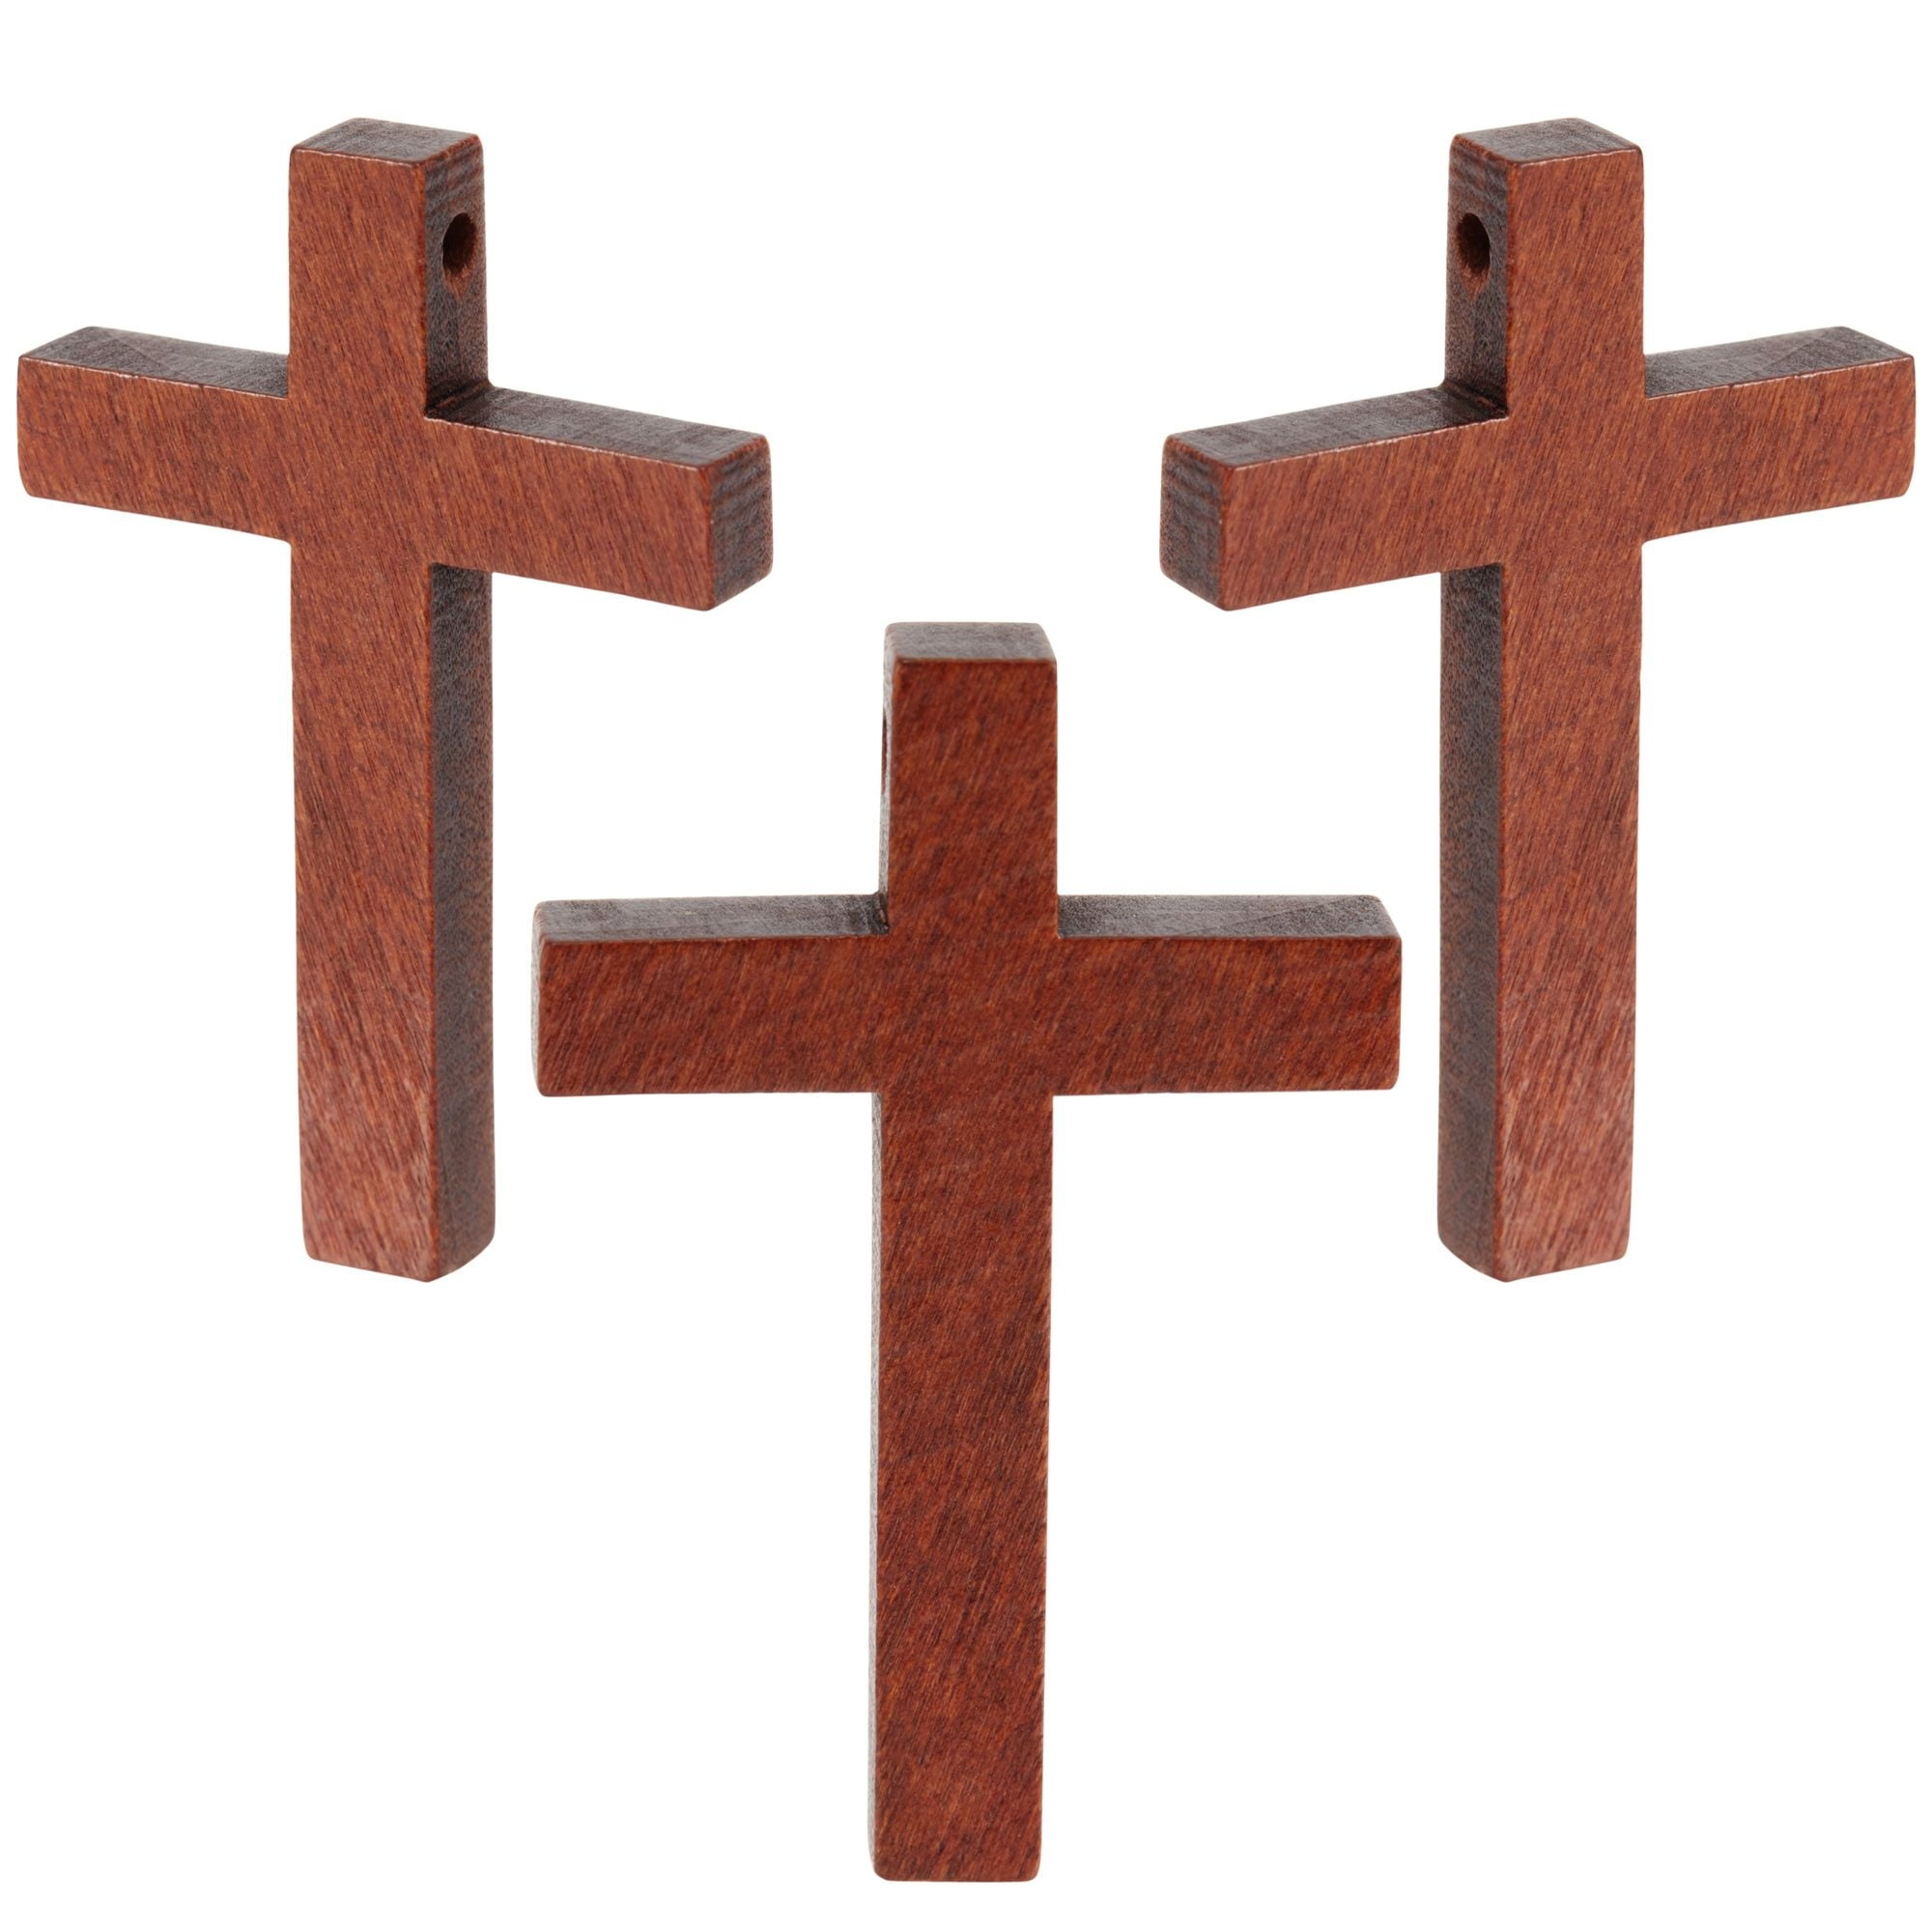 50 Pack Bulk Small Cross Set for Crafts, Wooden Cross Charms for